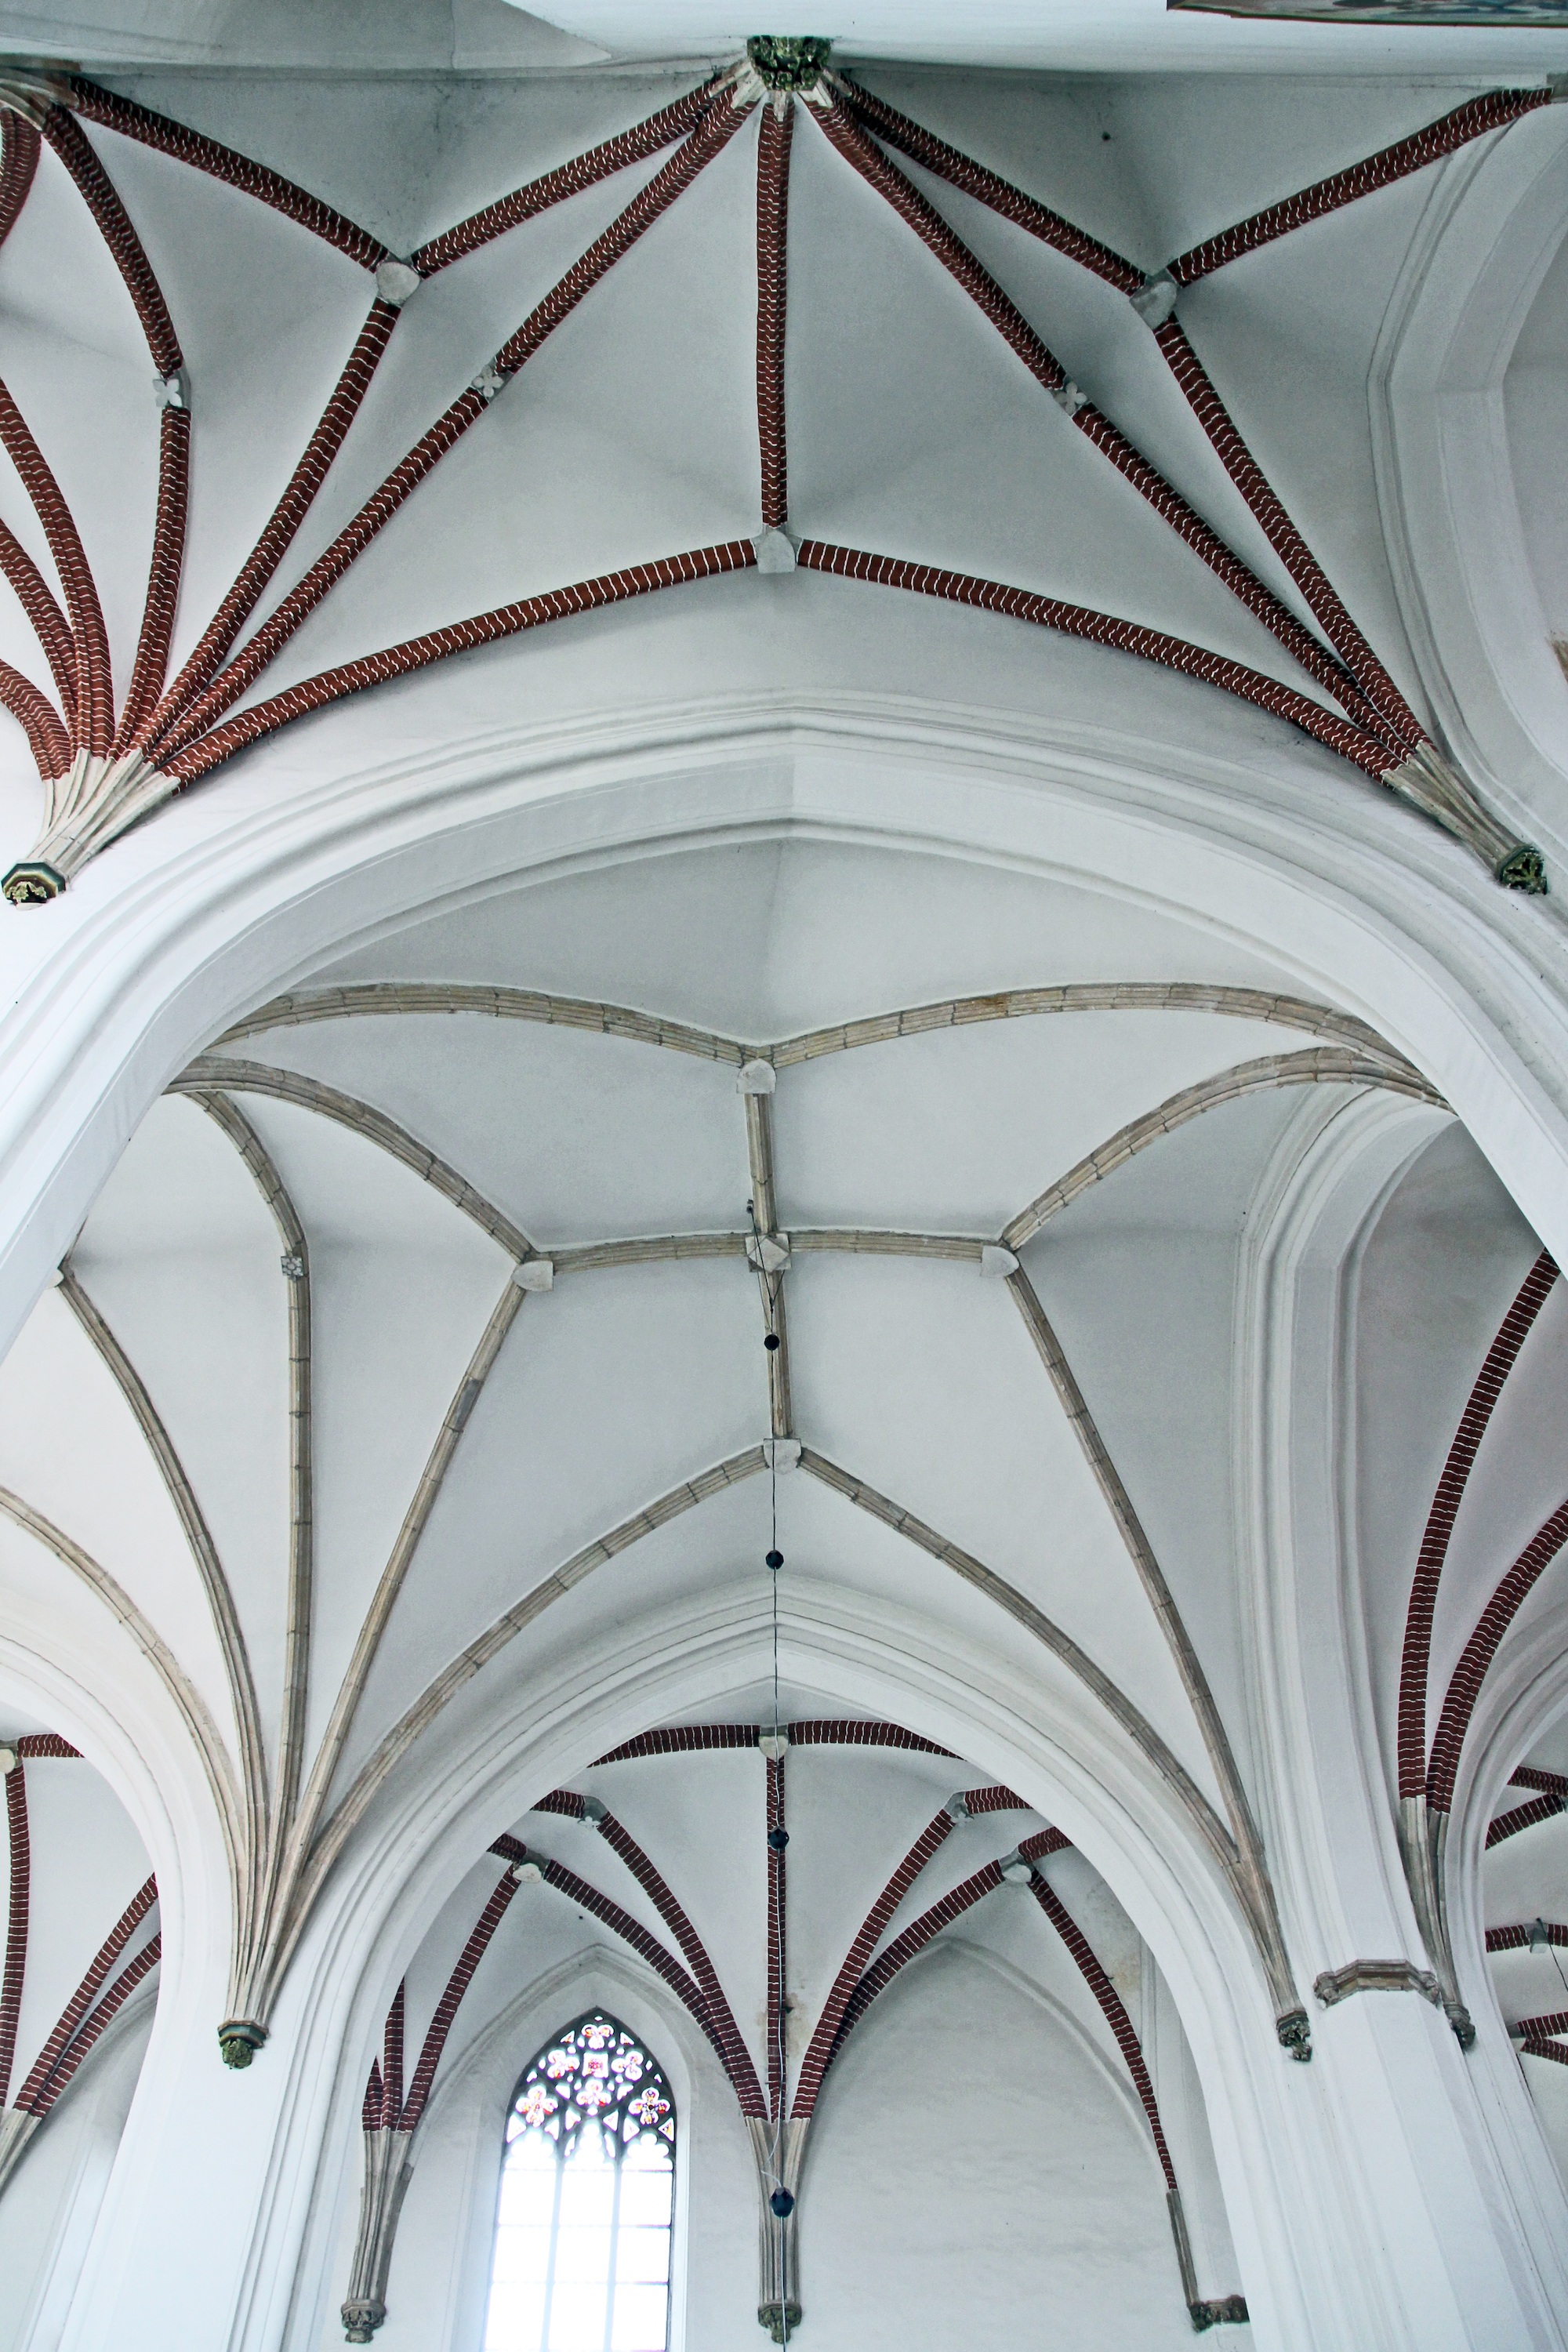 Wrocław, the Collegiate Church of the Holy Cross, vaults of the nave, c. 1380 (source: J. Adamski)